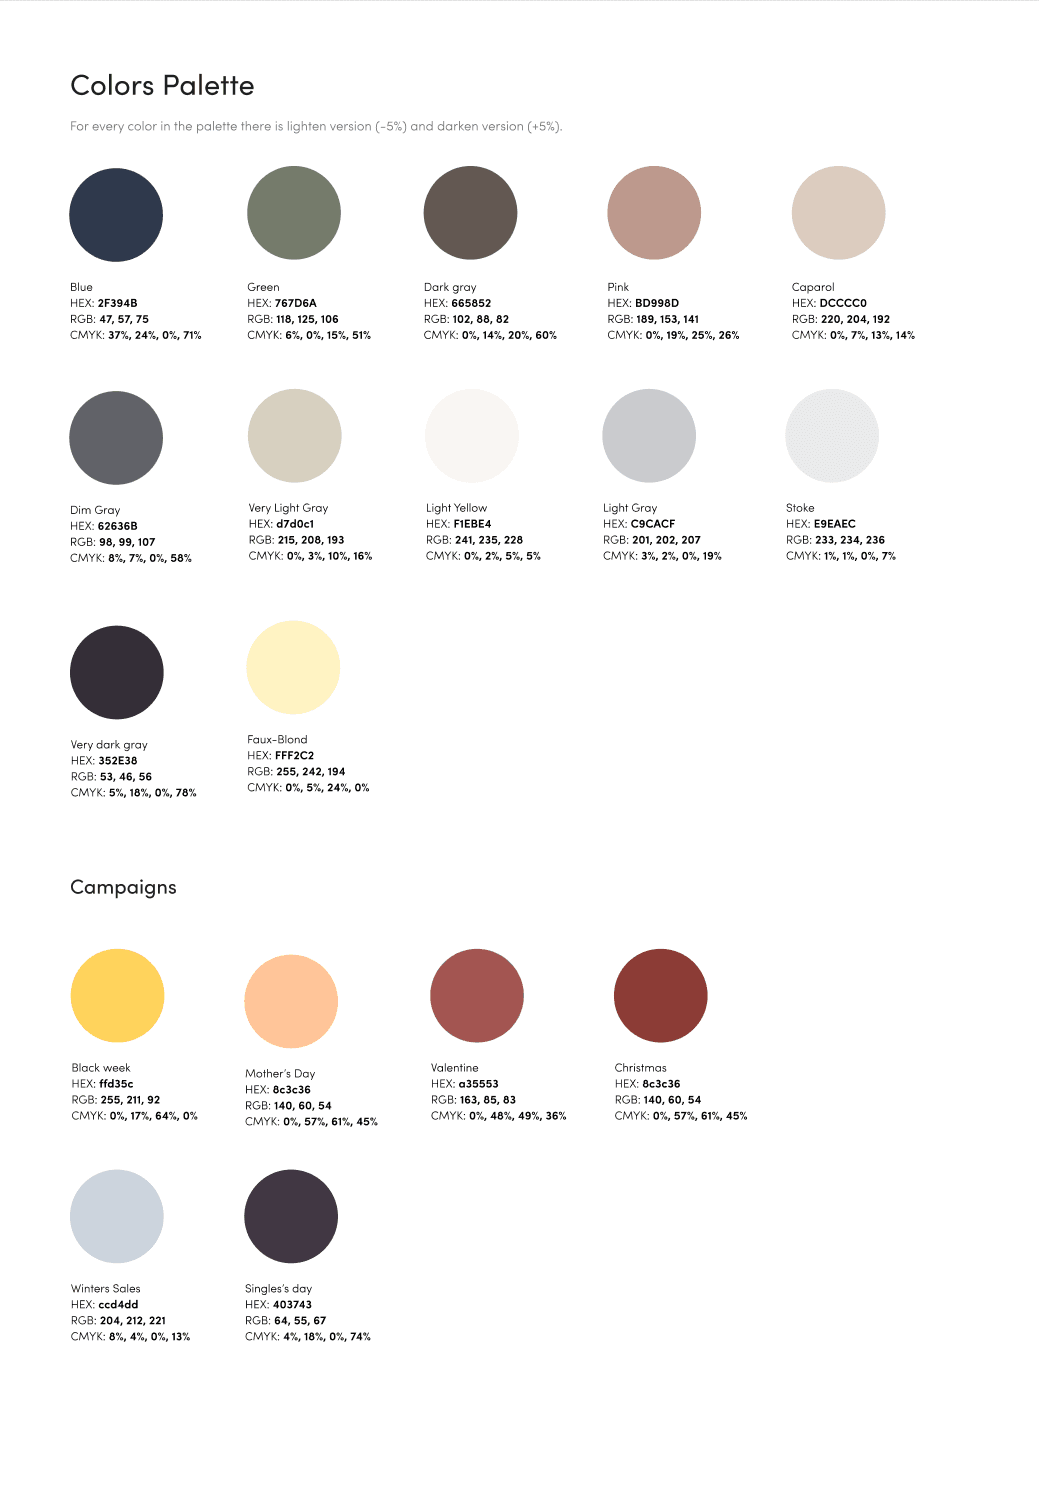 Color palette with various shades and names for design purposes.